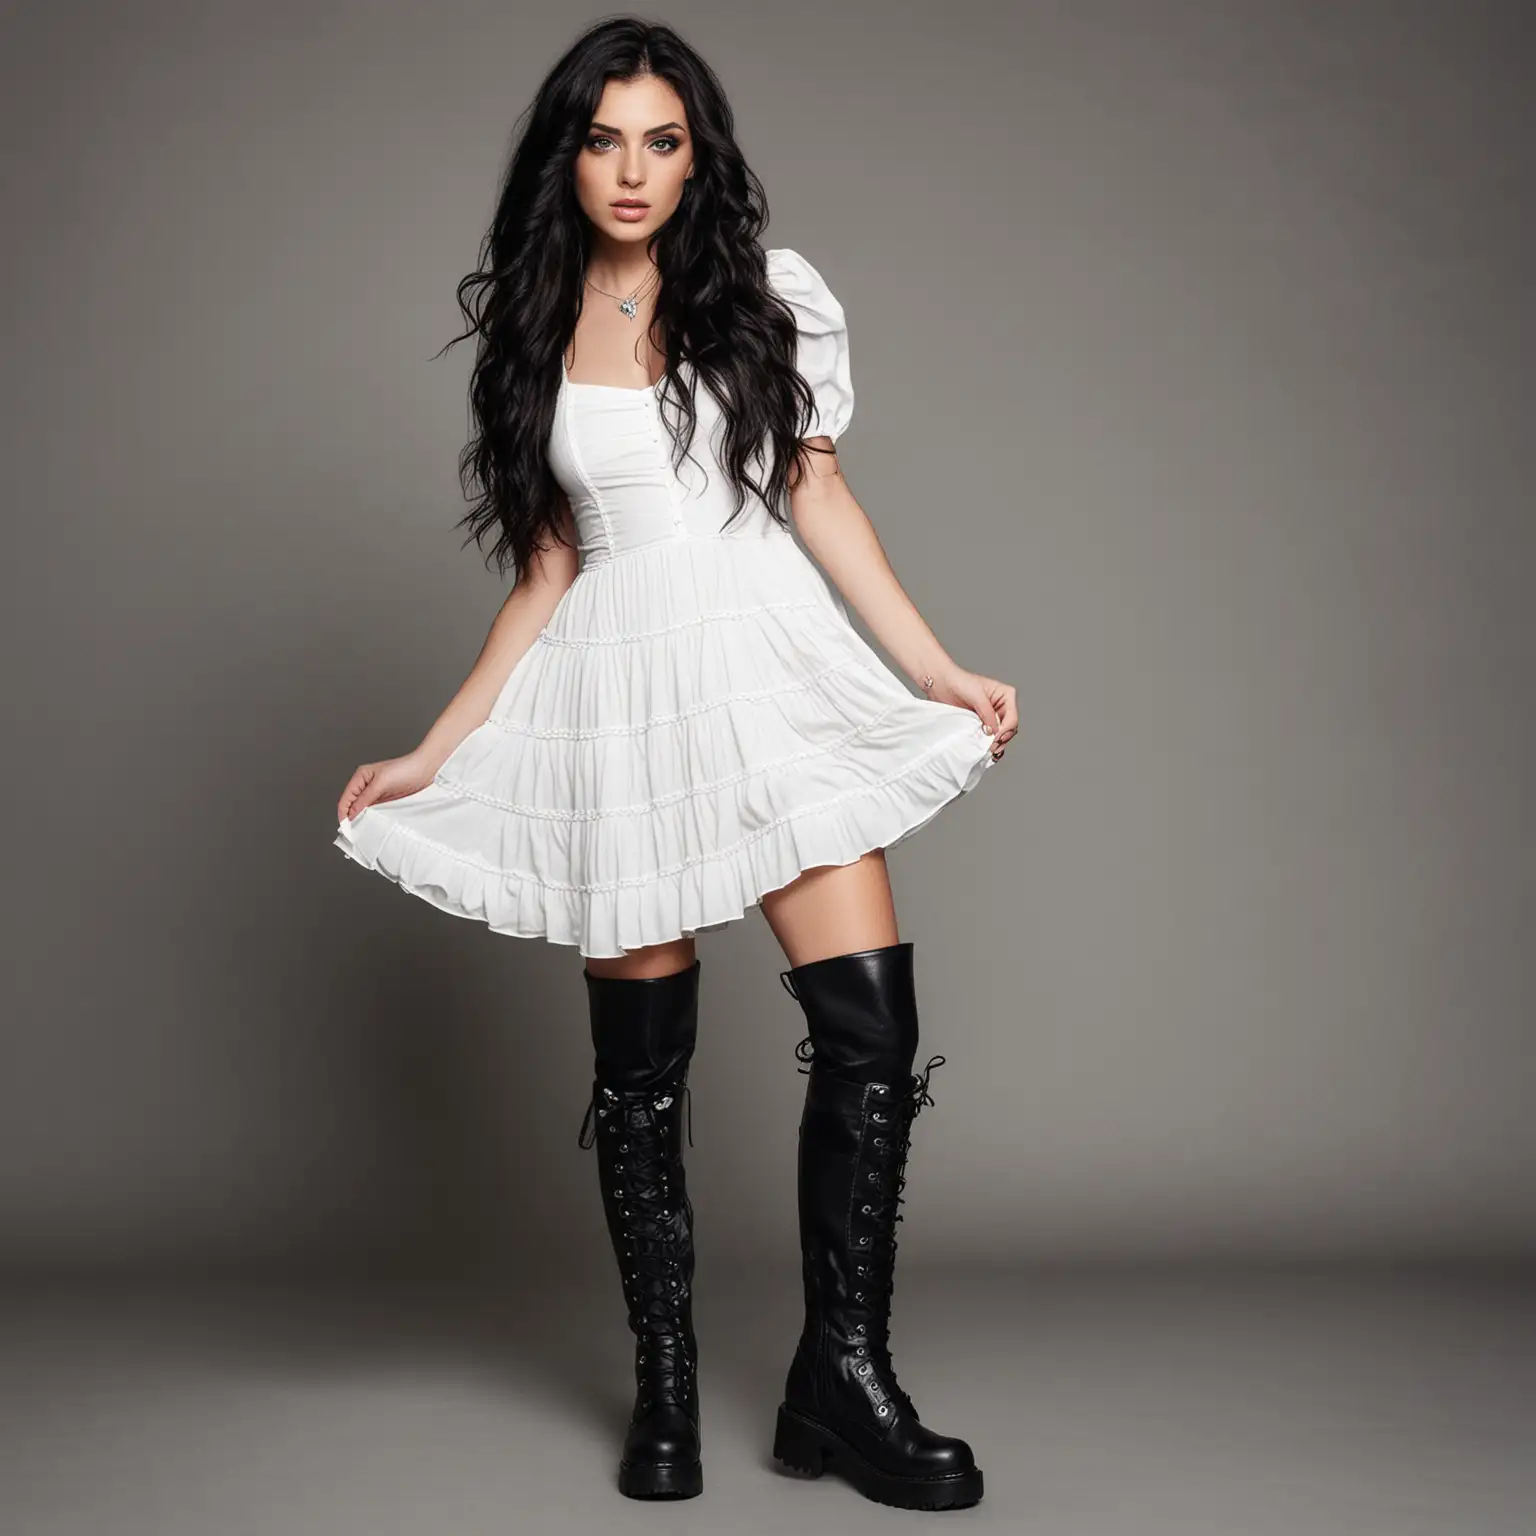 Edgy Rockstar Model Posing in Long Wavy Black Hair and Combat Boots